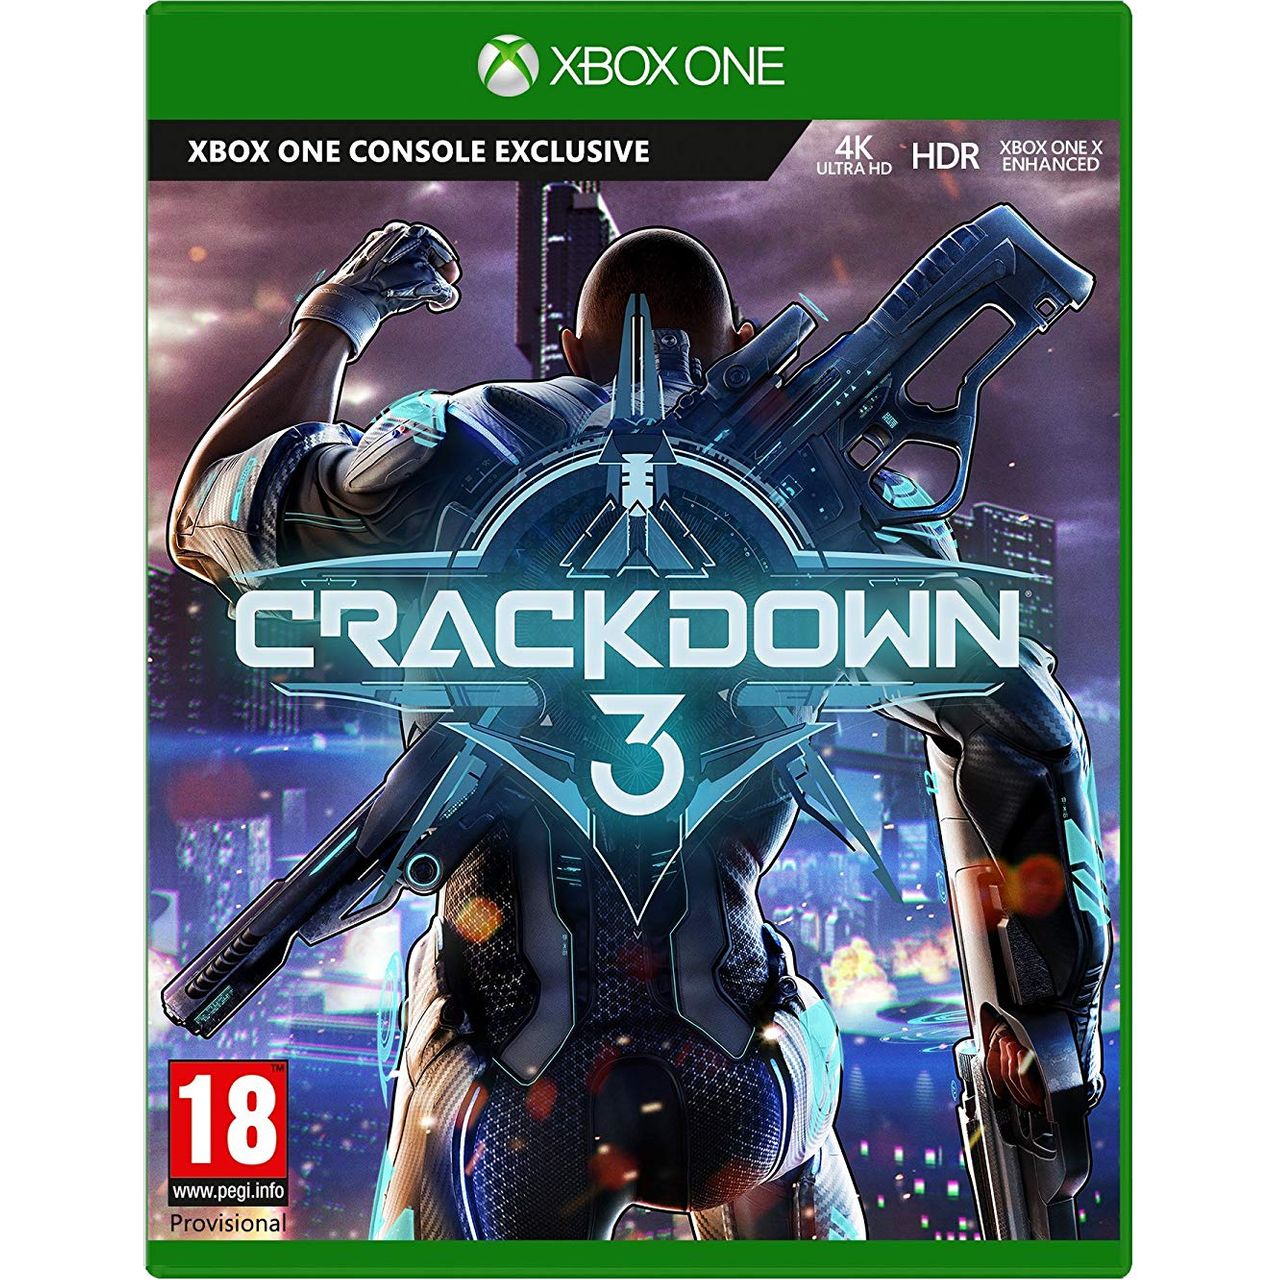 Crackdown 3 for Xbox One [Enhanced for Xbox One X] Review